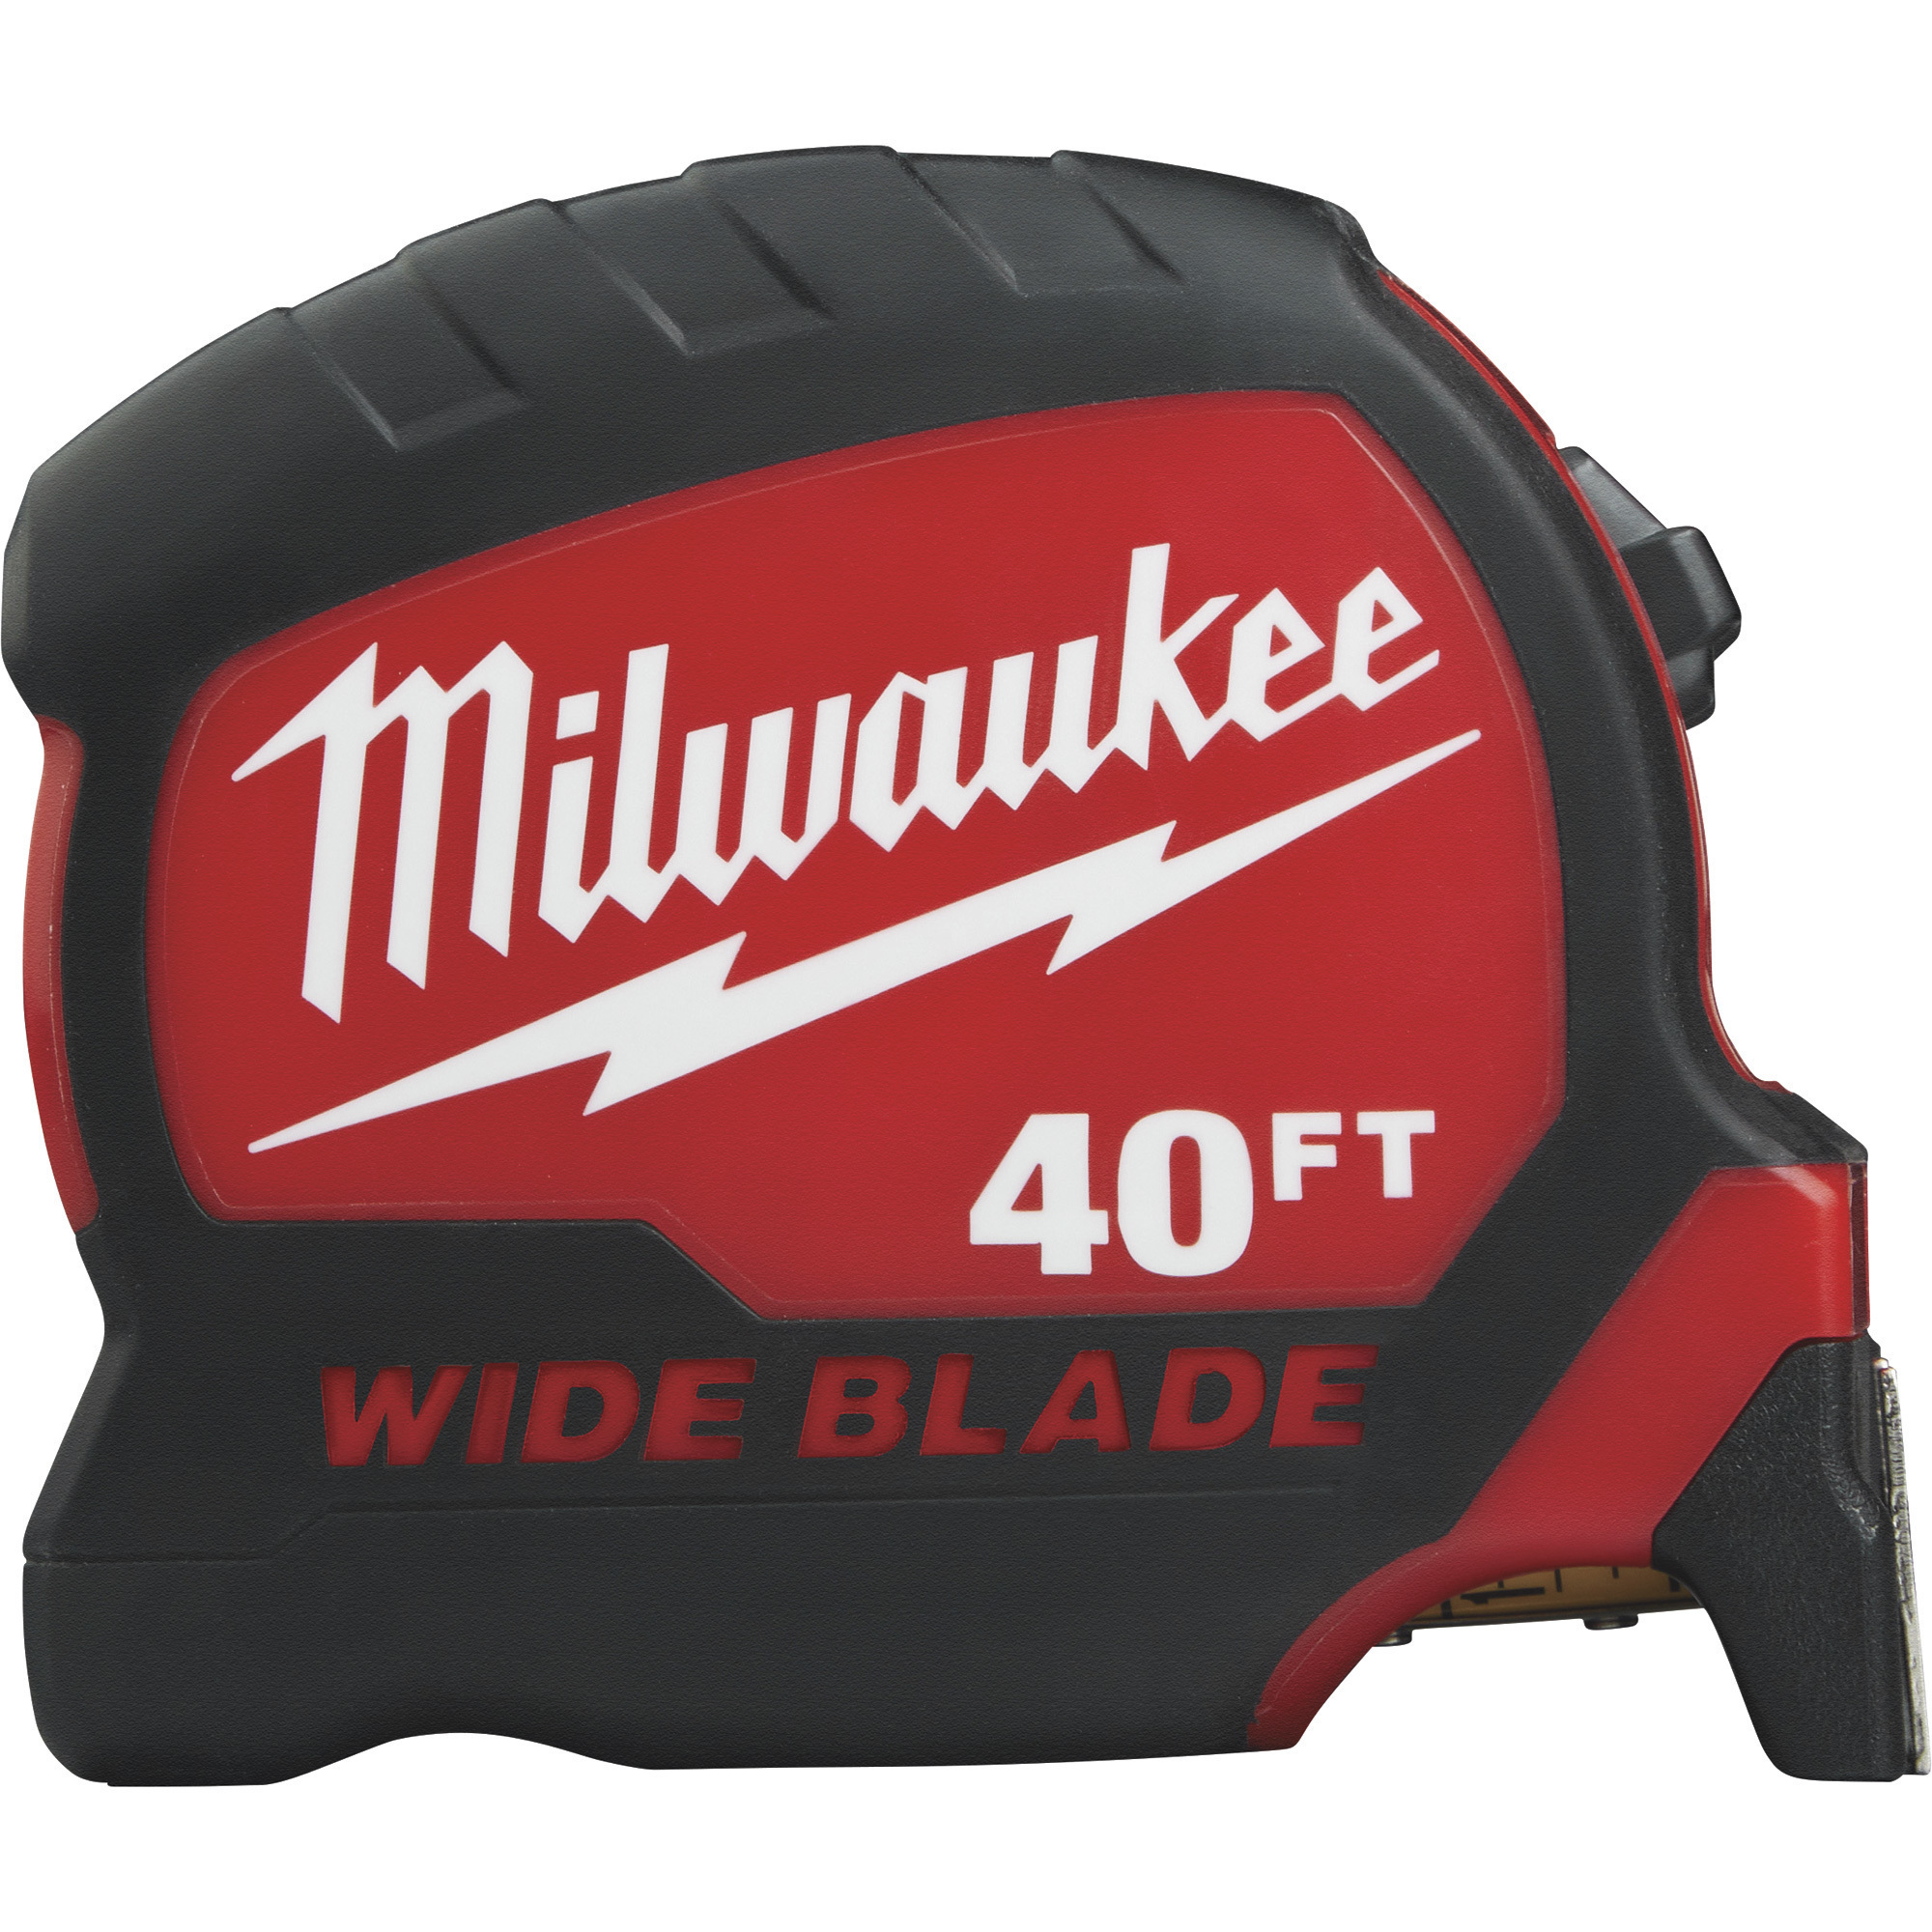 Milwaukee 40ft. Wide Blade Tape Measure, 40ft.L x 1 5/16Inch W, Model 48-22-0240